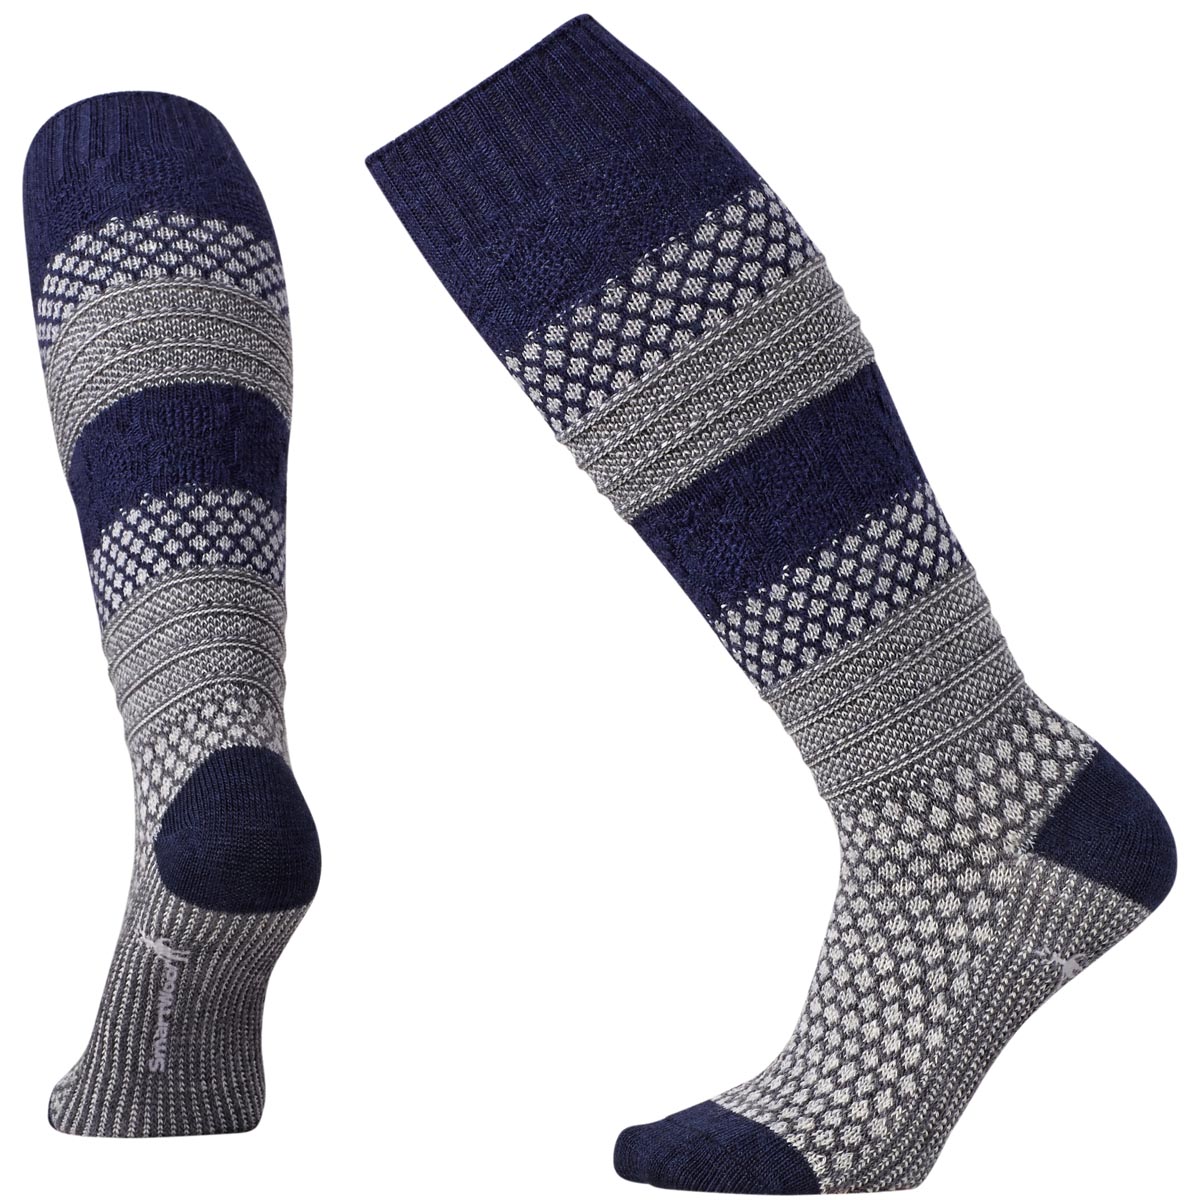 SmartWool Women's Popcorn Cable Knee High Discontinued Pricing